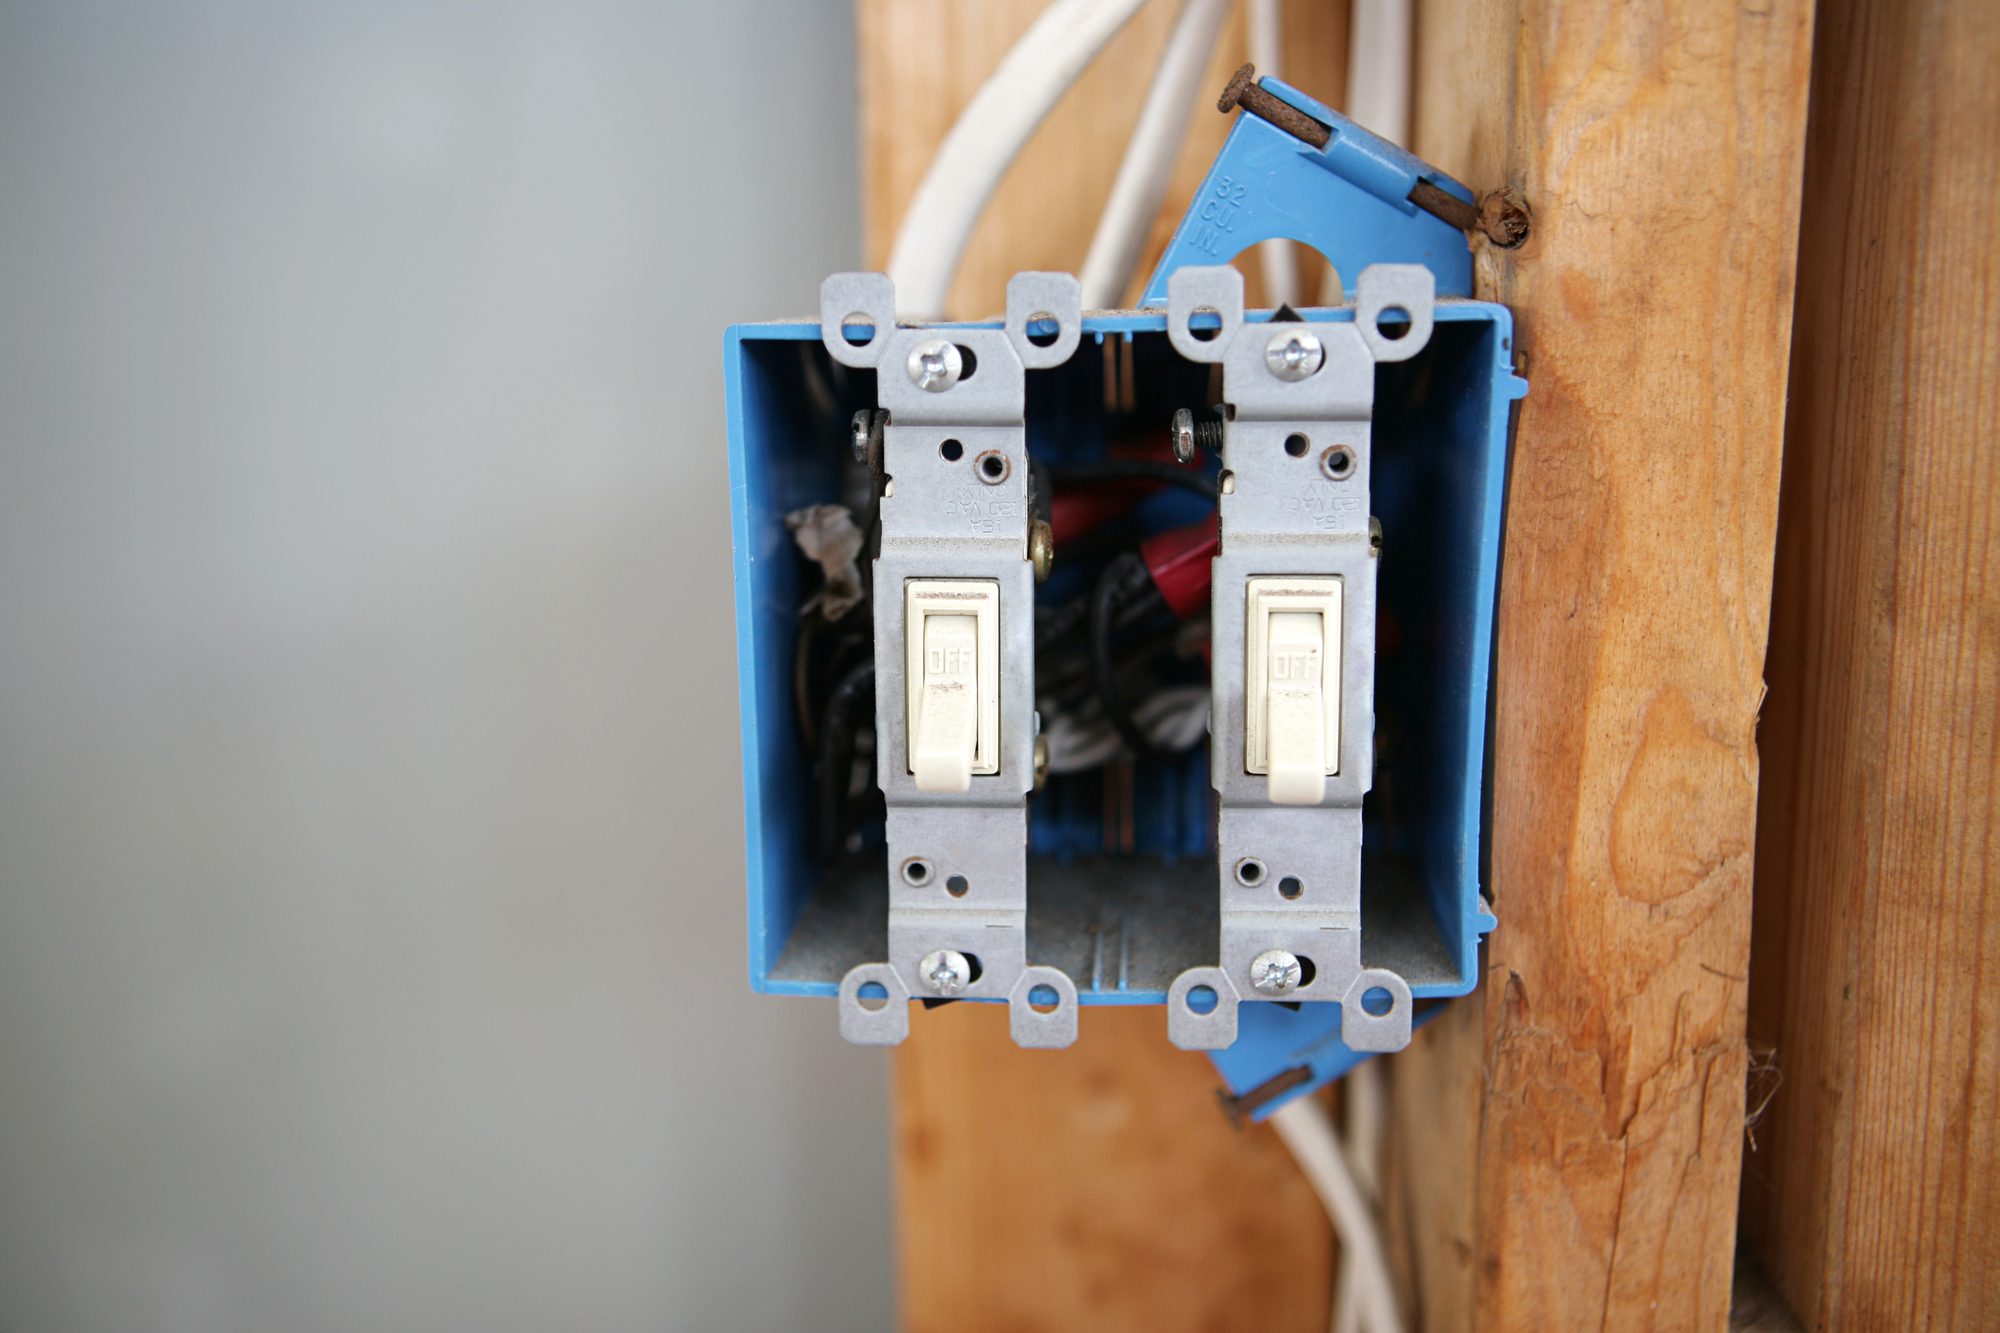 A two gang, 120 volt single pole electrical switch box installed on a wooden stud with wiring visible.  All logos removed.  Remaining text is generic. Horizontal with room for text per customer request.